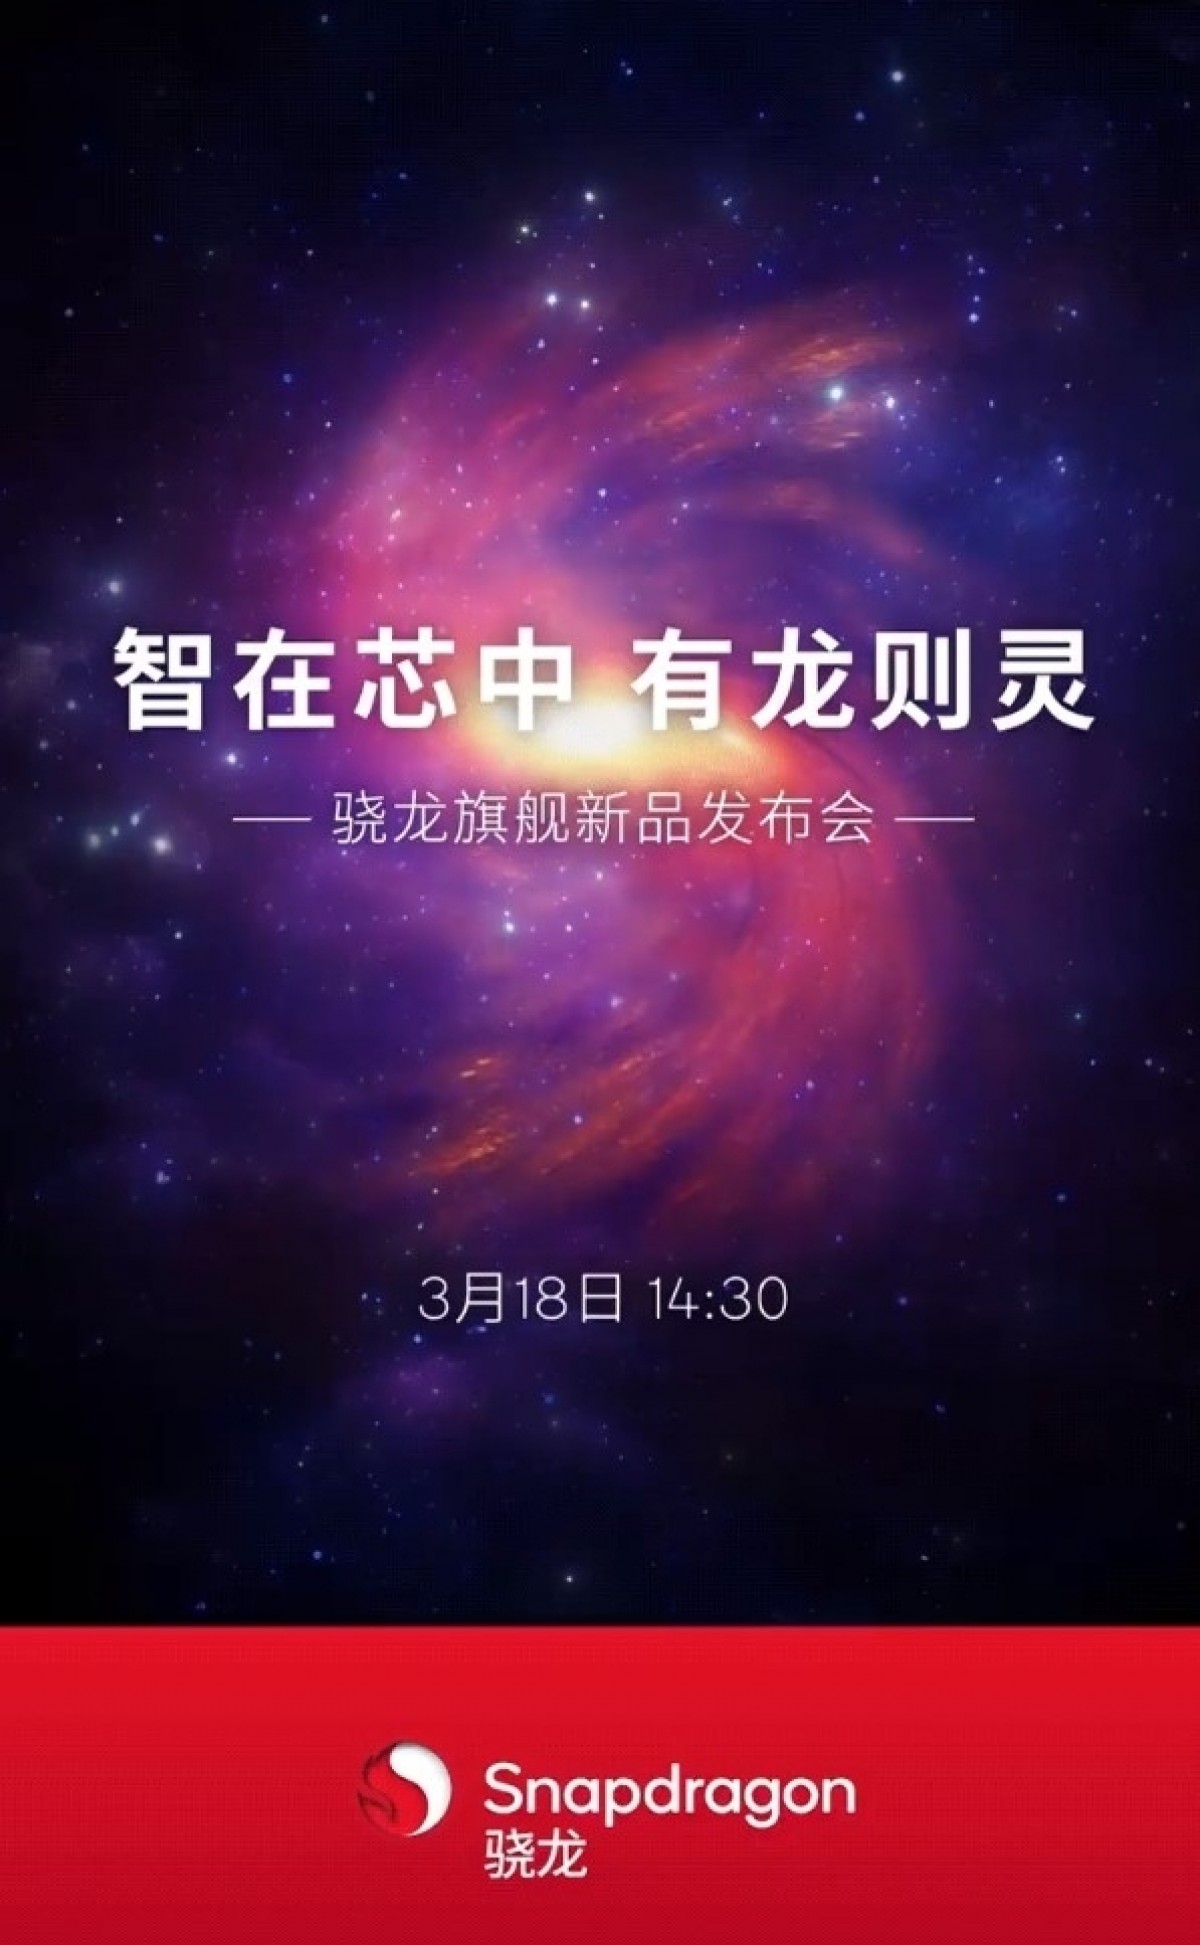 Qualcomm Snapdragon event will take place on March 18 at 14:30 Beijing time